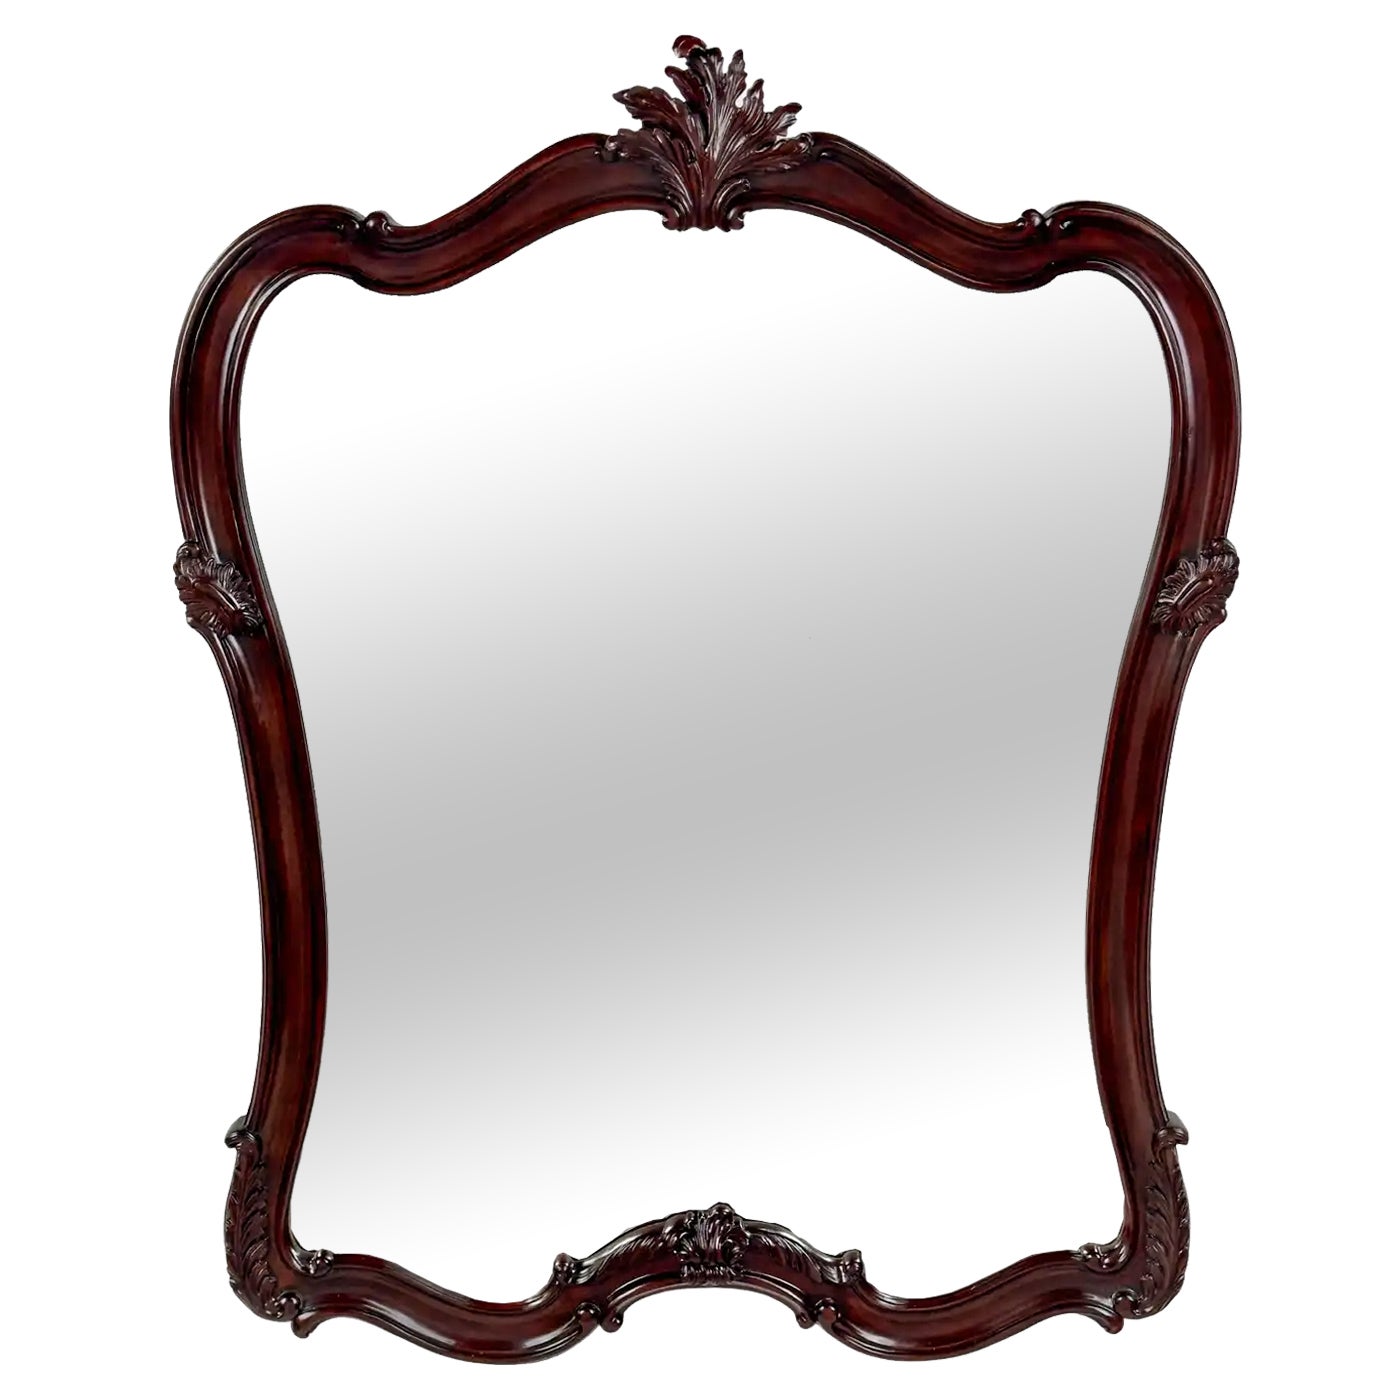 Cherry Mantel Mirrors and Fireplace Mirrors